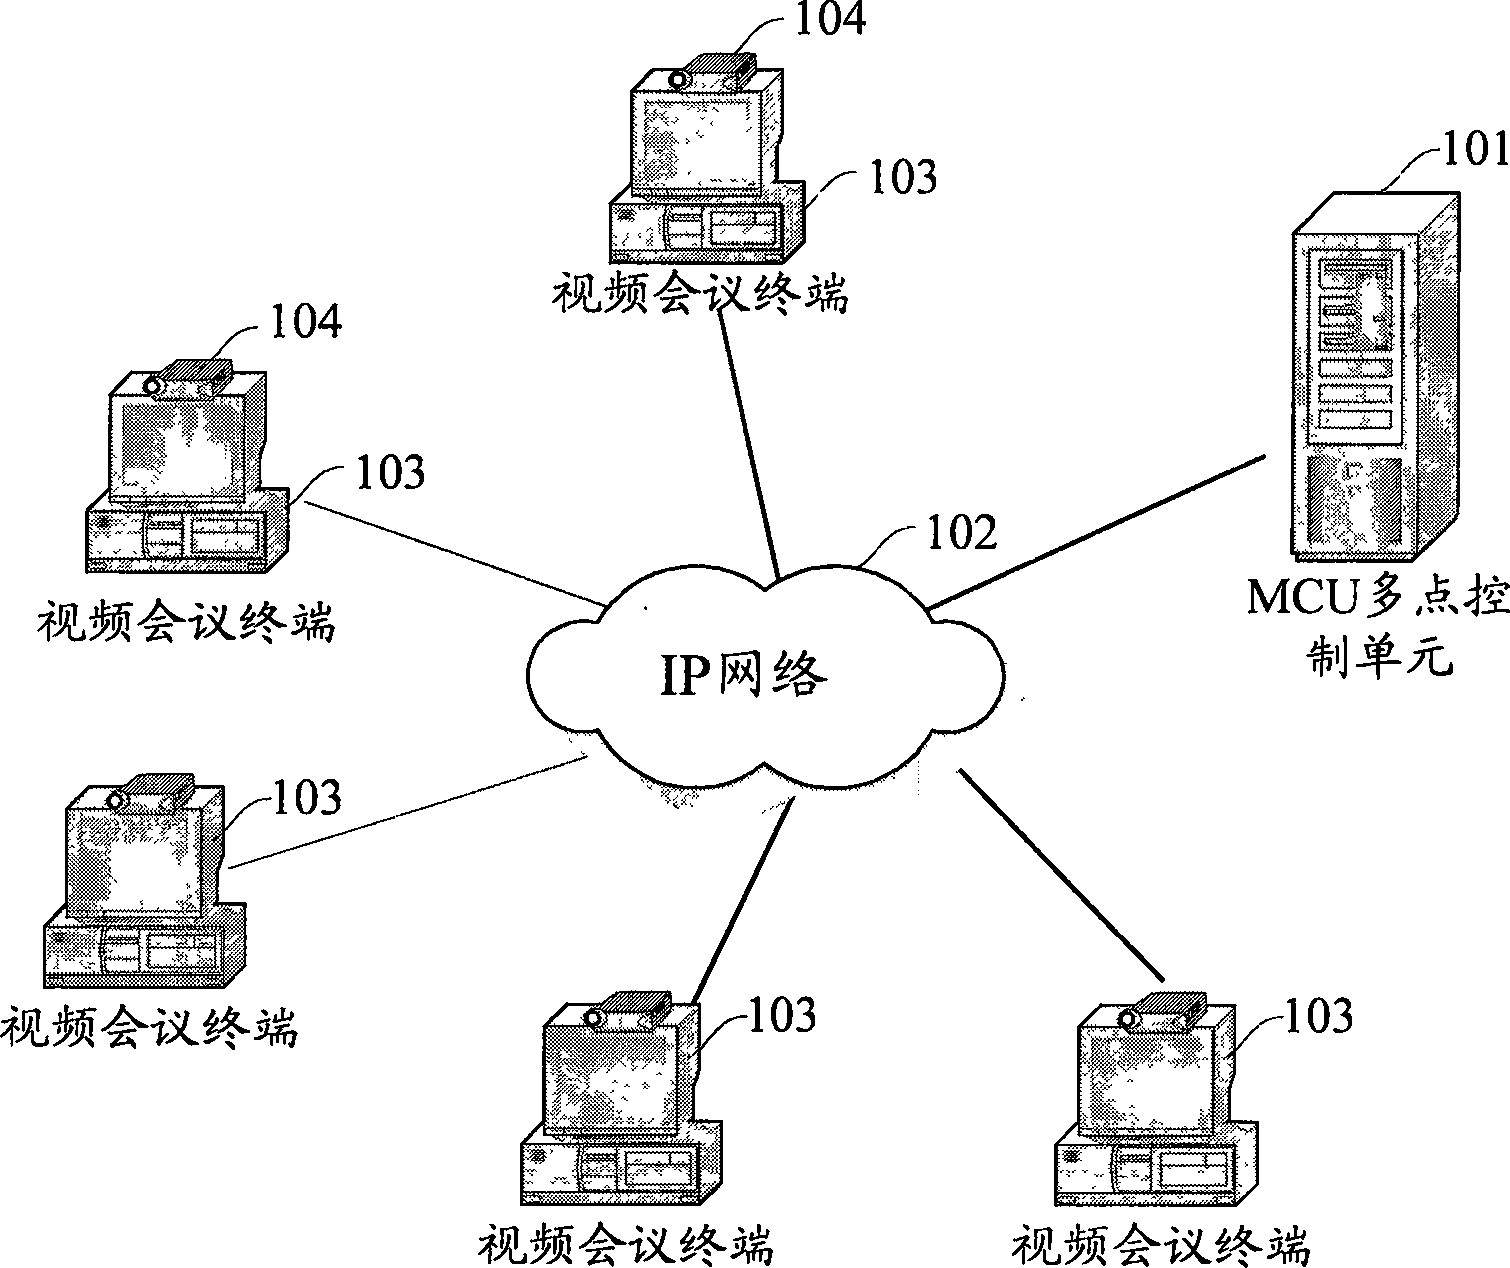 Method for self-controlling videoconference based on remote control function of long-range camera